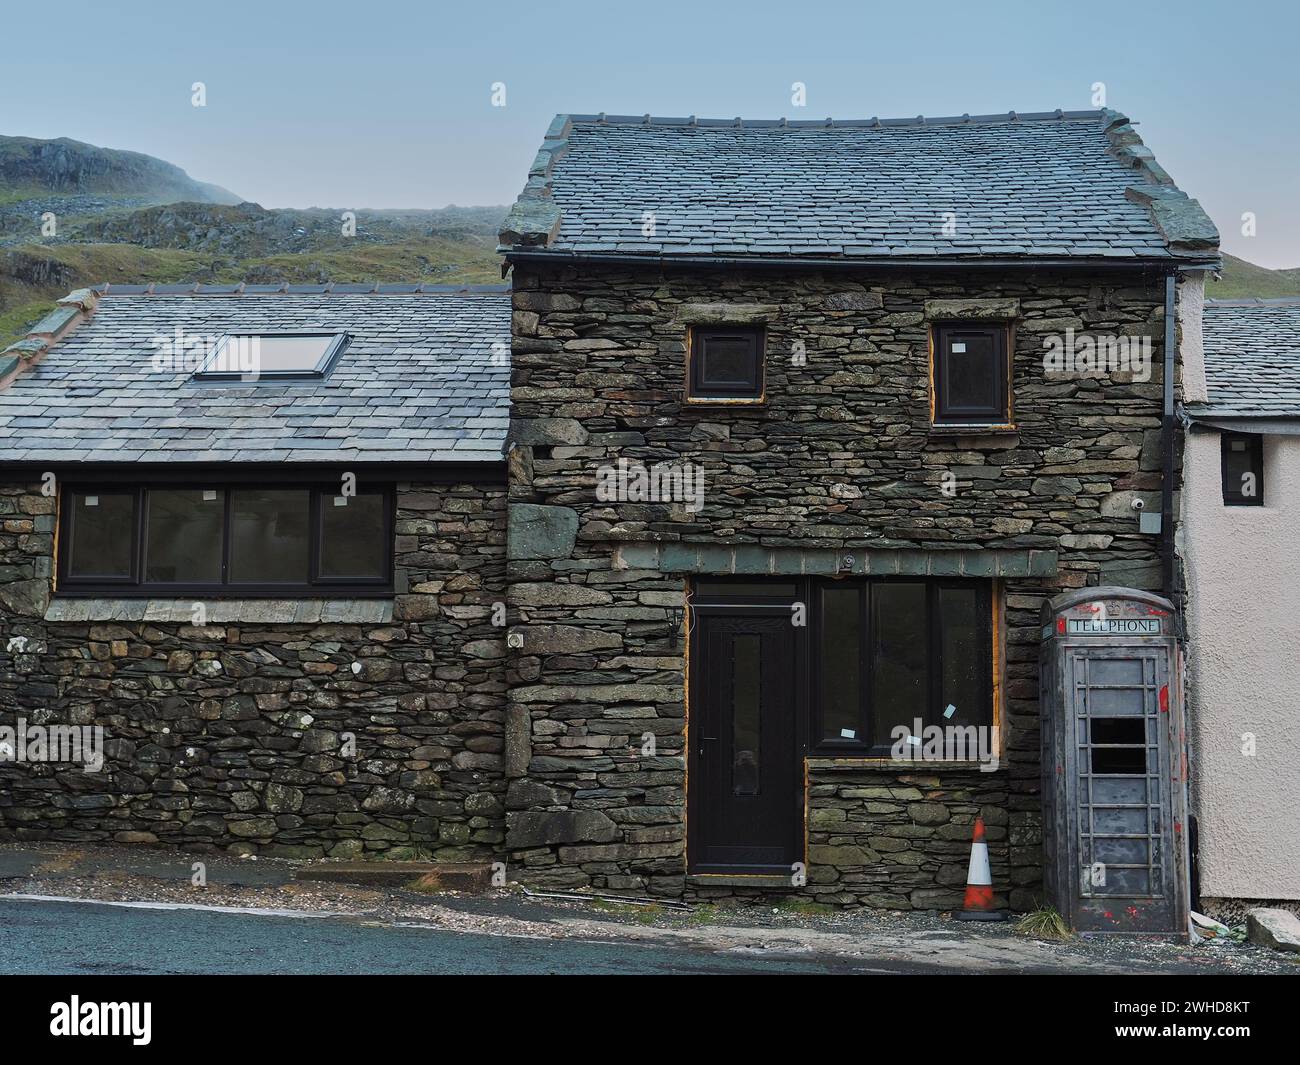 old British telephone kiosk painted grey, in a state of disrepair outside a traditional Lakeland stone building. Phone boxes are usually painted red. Stock Photo